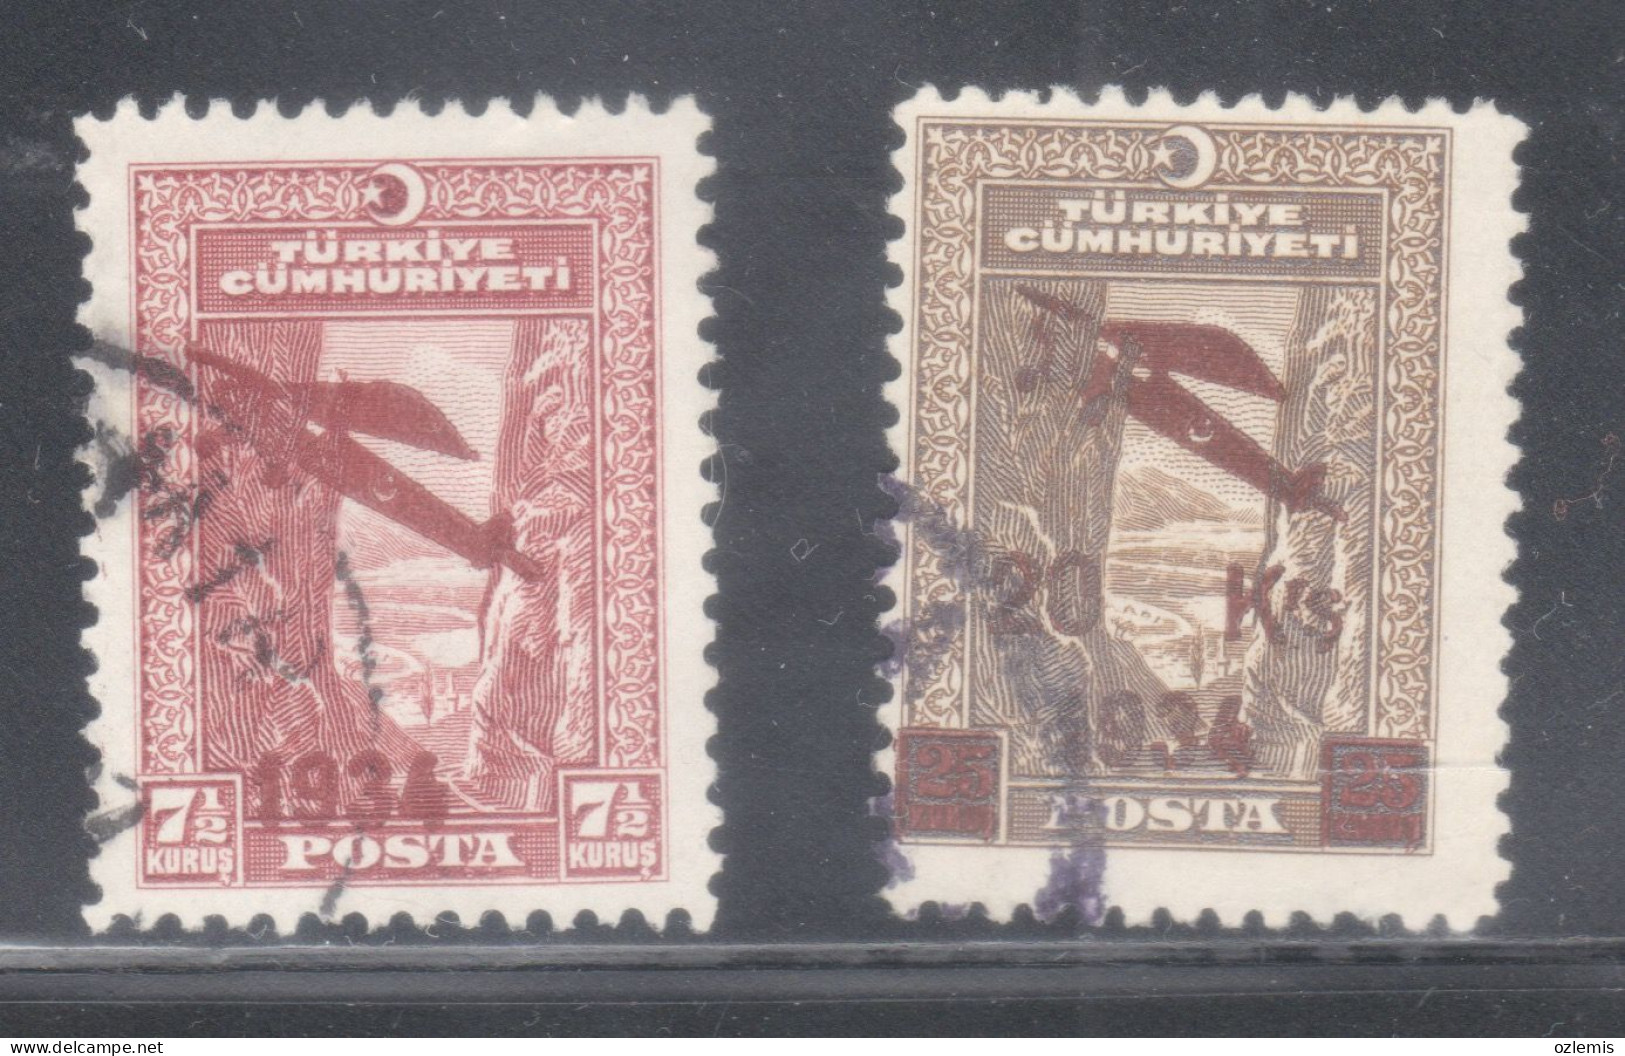 TURKEY,TURKEI,TURQUIE ,SURCHARGED AIRMAIL STAMPS FIRST ISSUE ,USED STAMPS ,1934 - Gebruikt